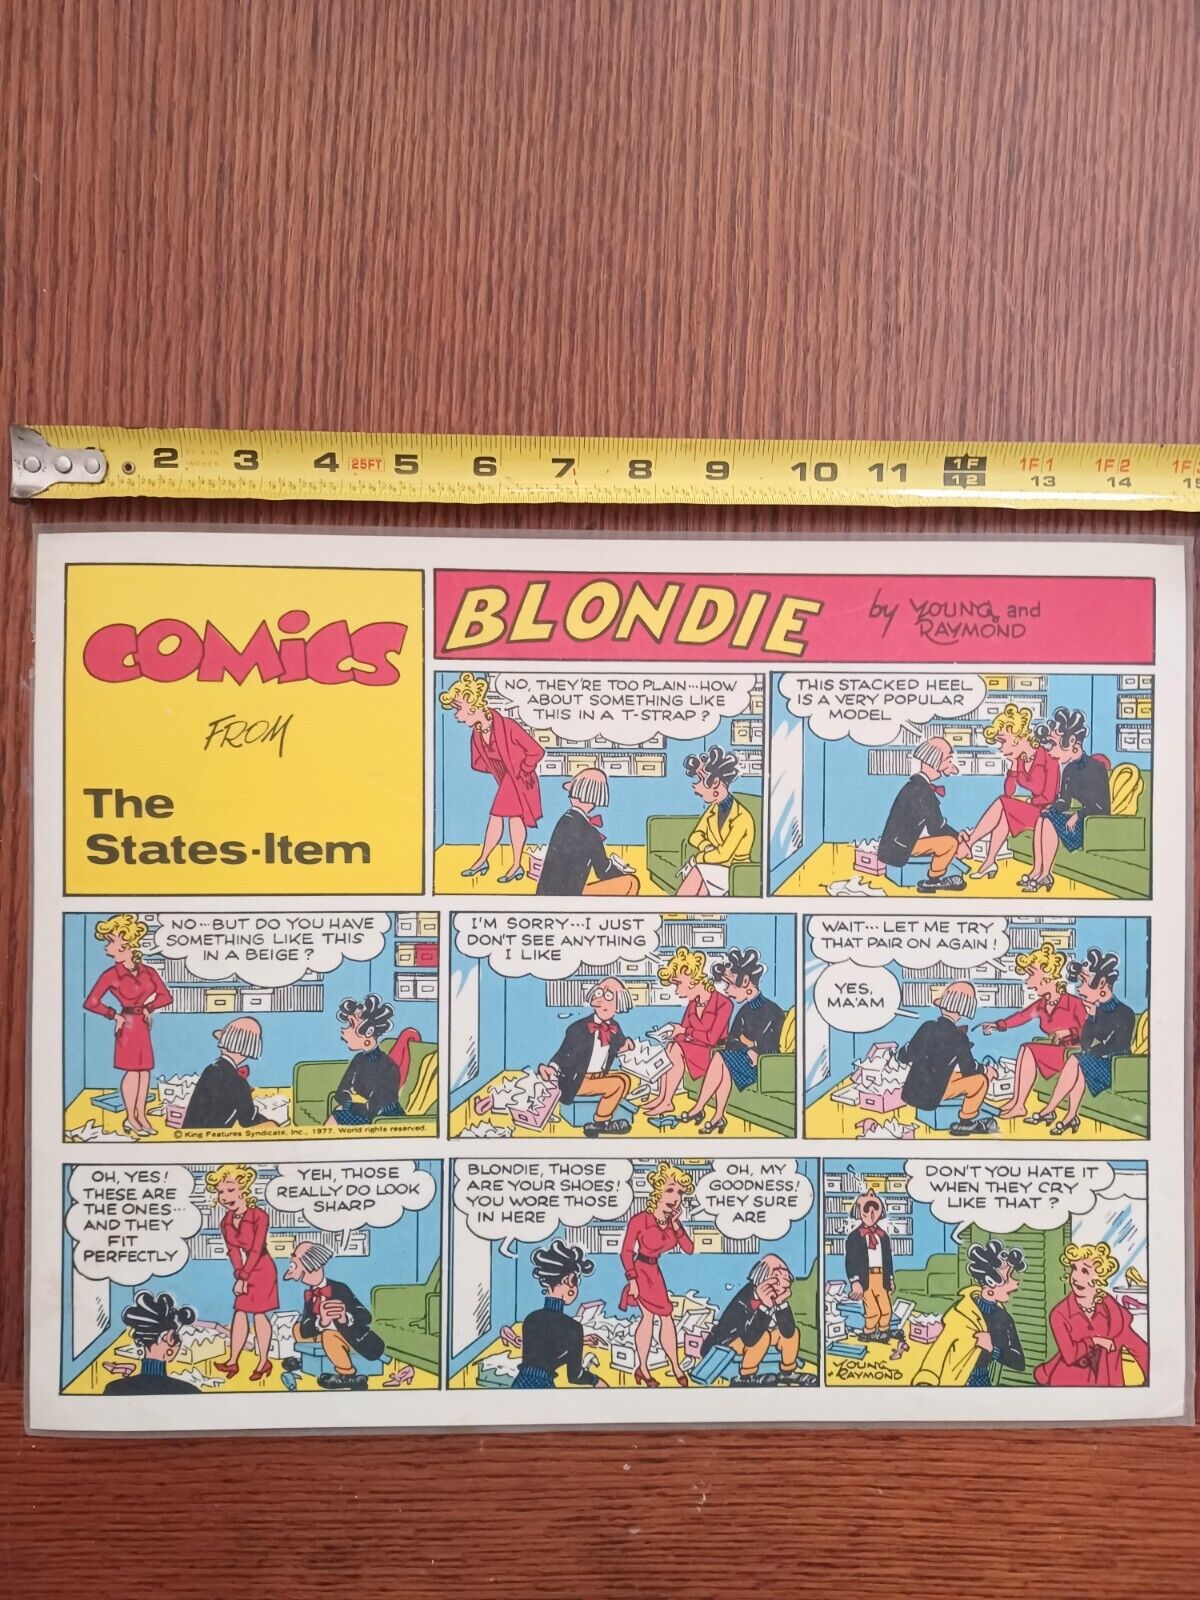 Comic Strip Placemats The States-Item New Orleans Blondie Snuffy Smith Hagar 